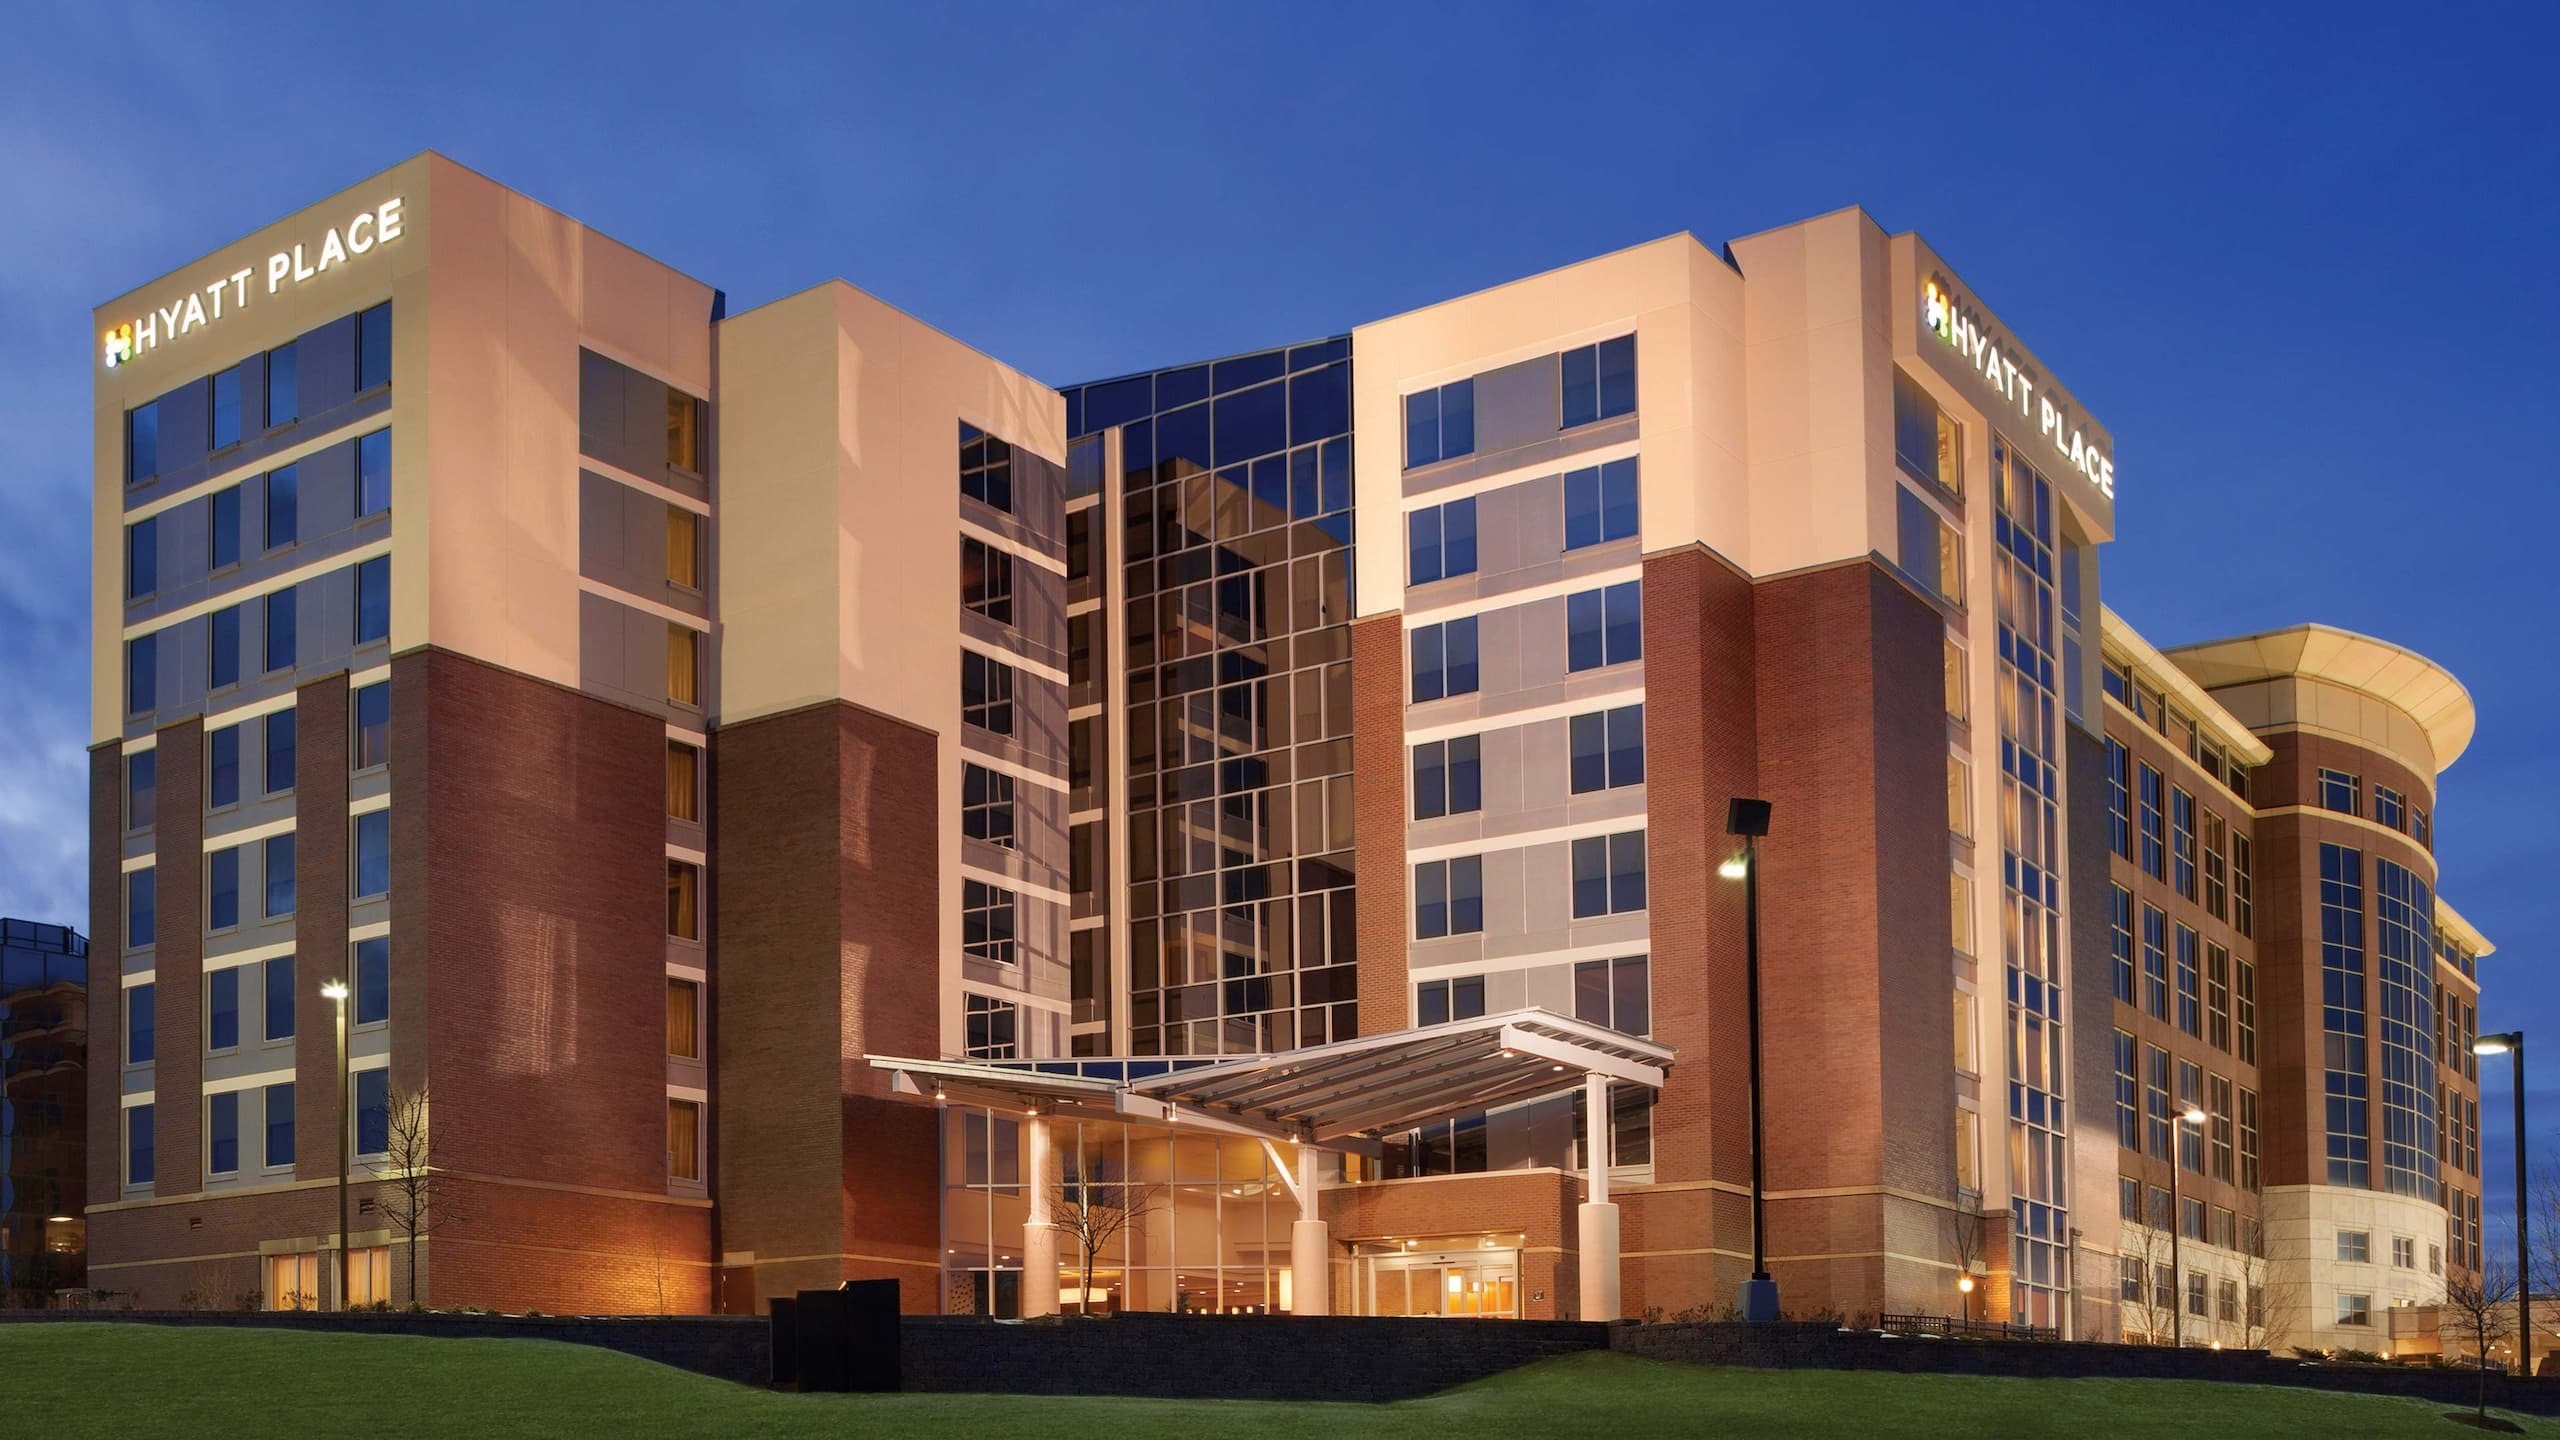 Photo of Hyatt Place St. Louis/Chesterfield, Chesterfield, MO